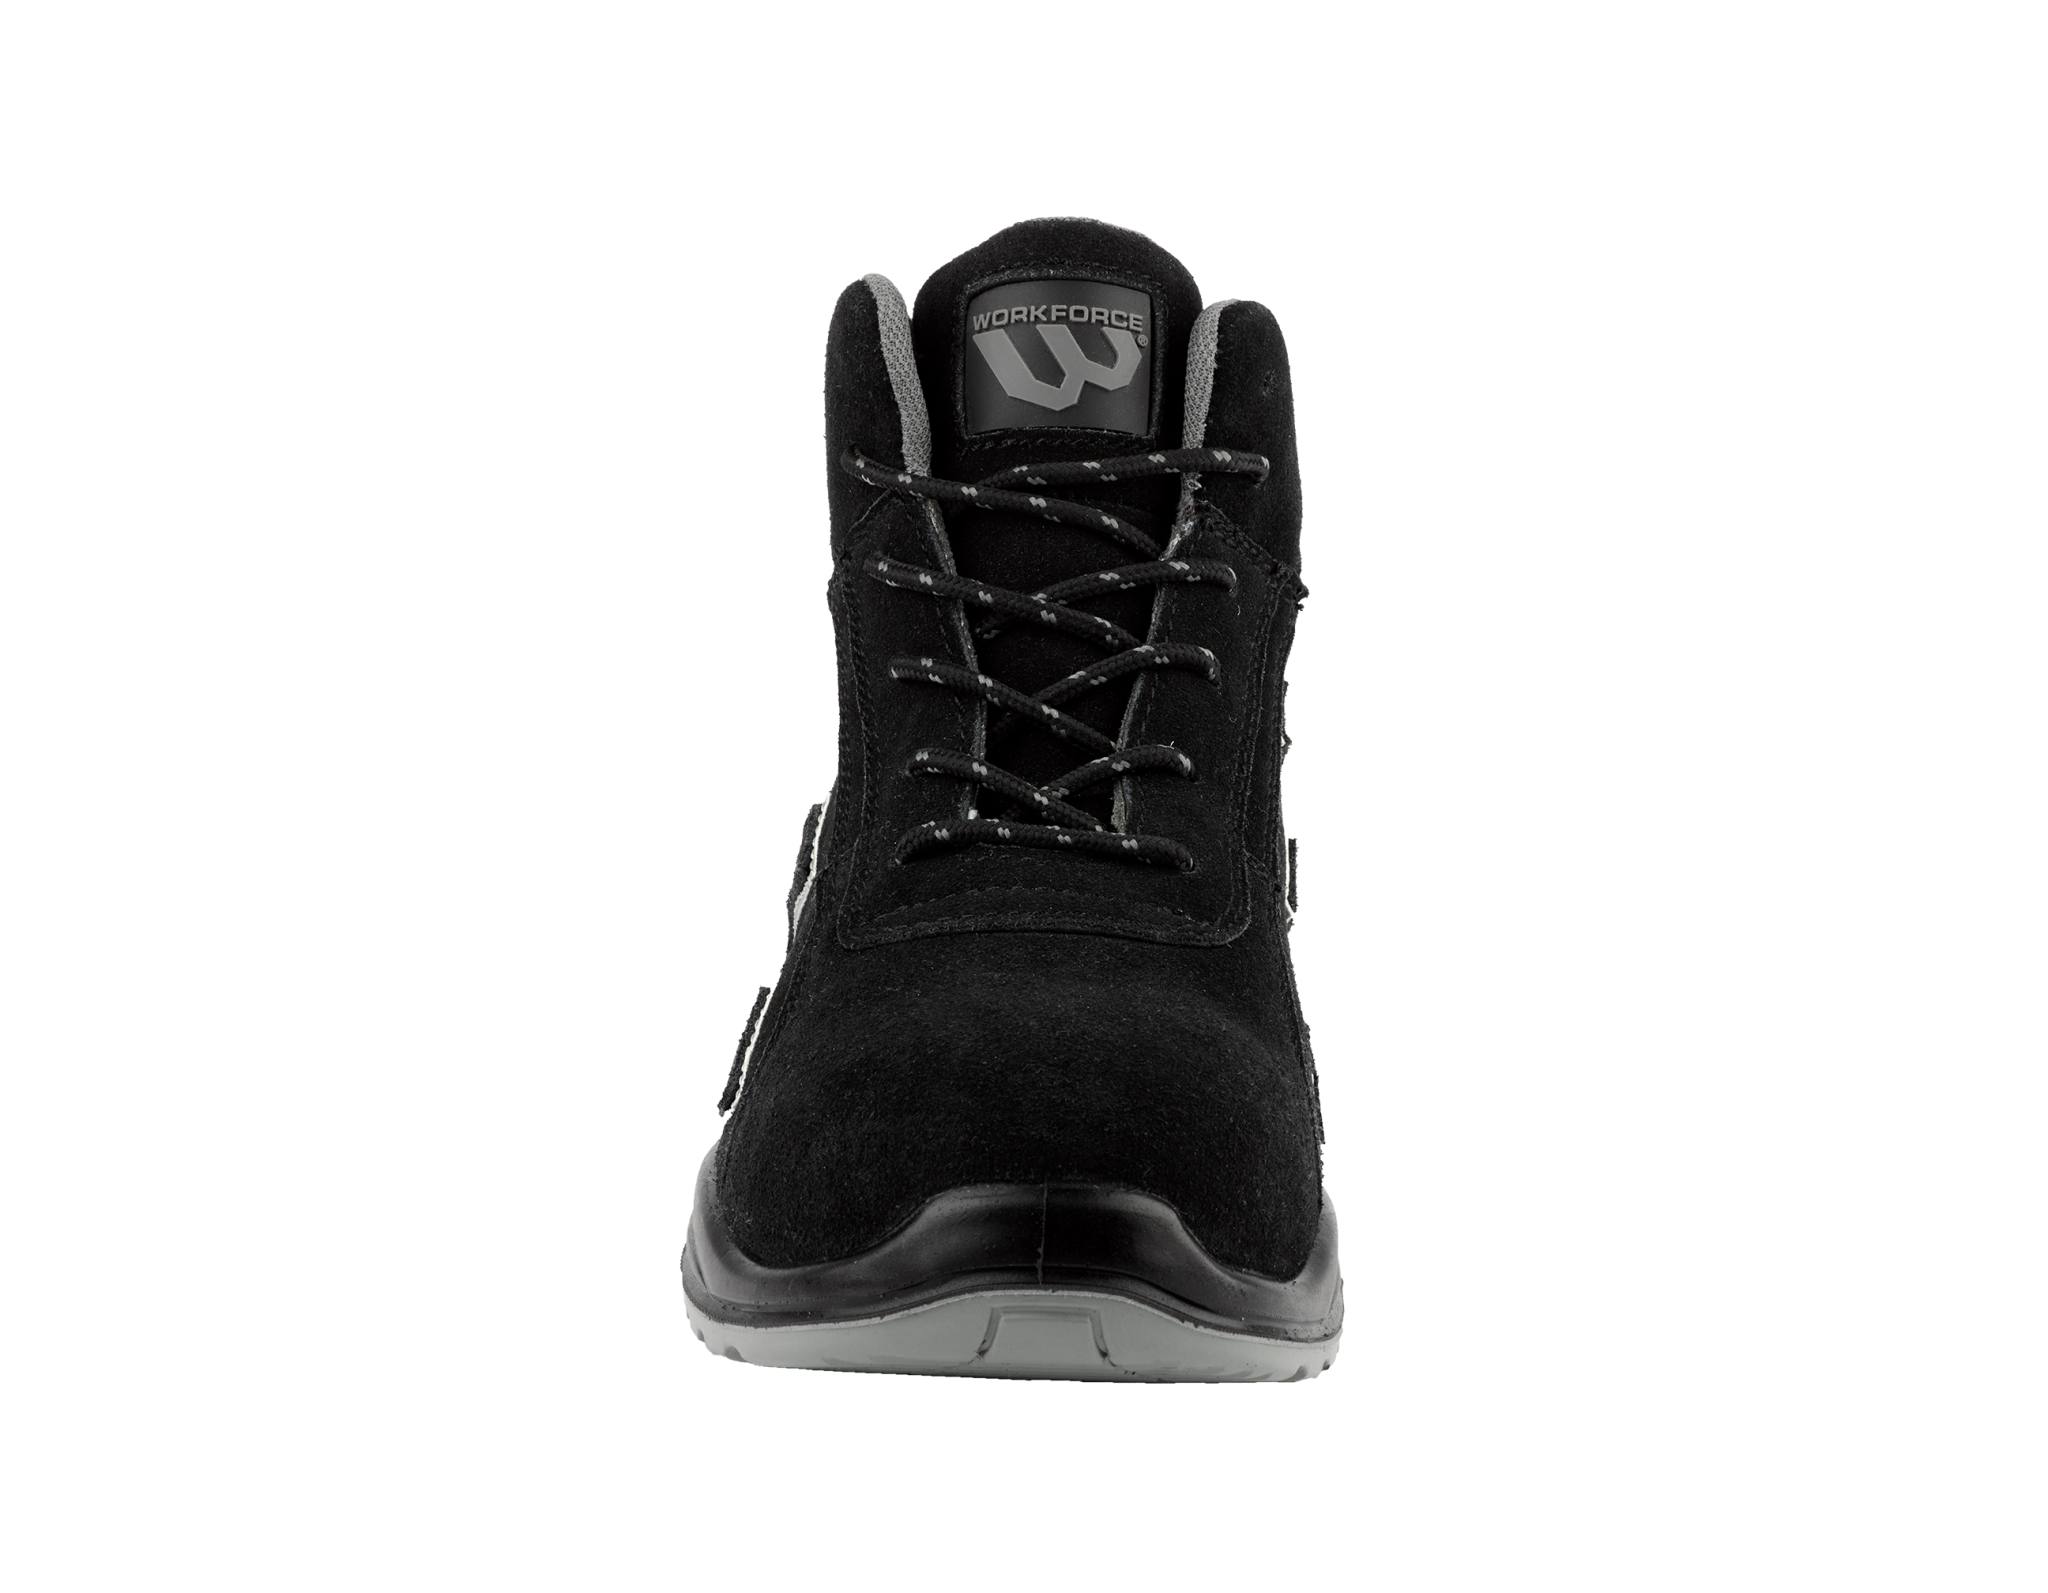 WORKFORCE SUEDE BOOT S1P DURABLE FOR ACTIVE PROFESSIONALS (WF33)